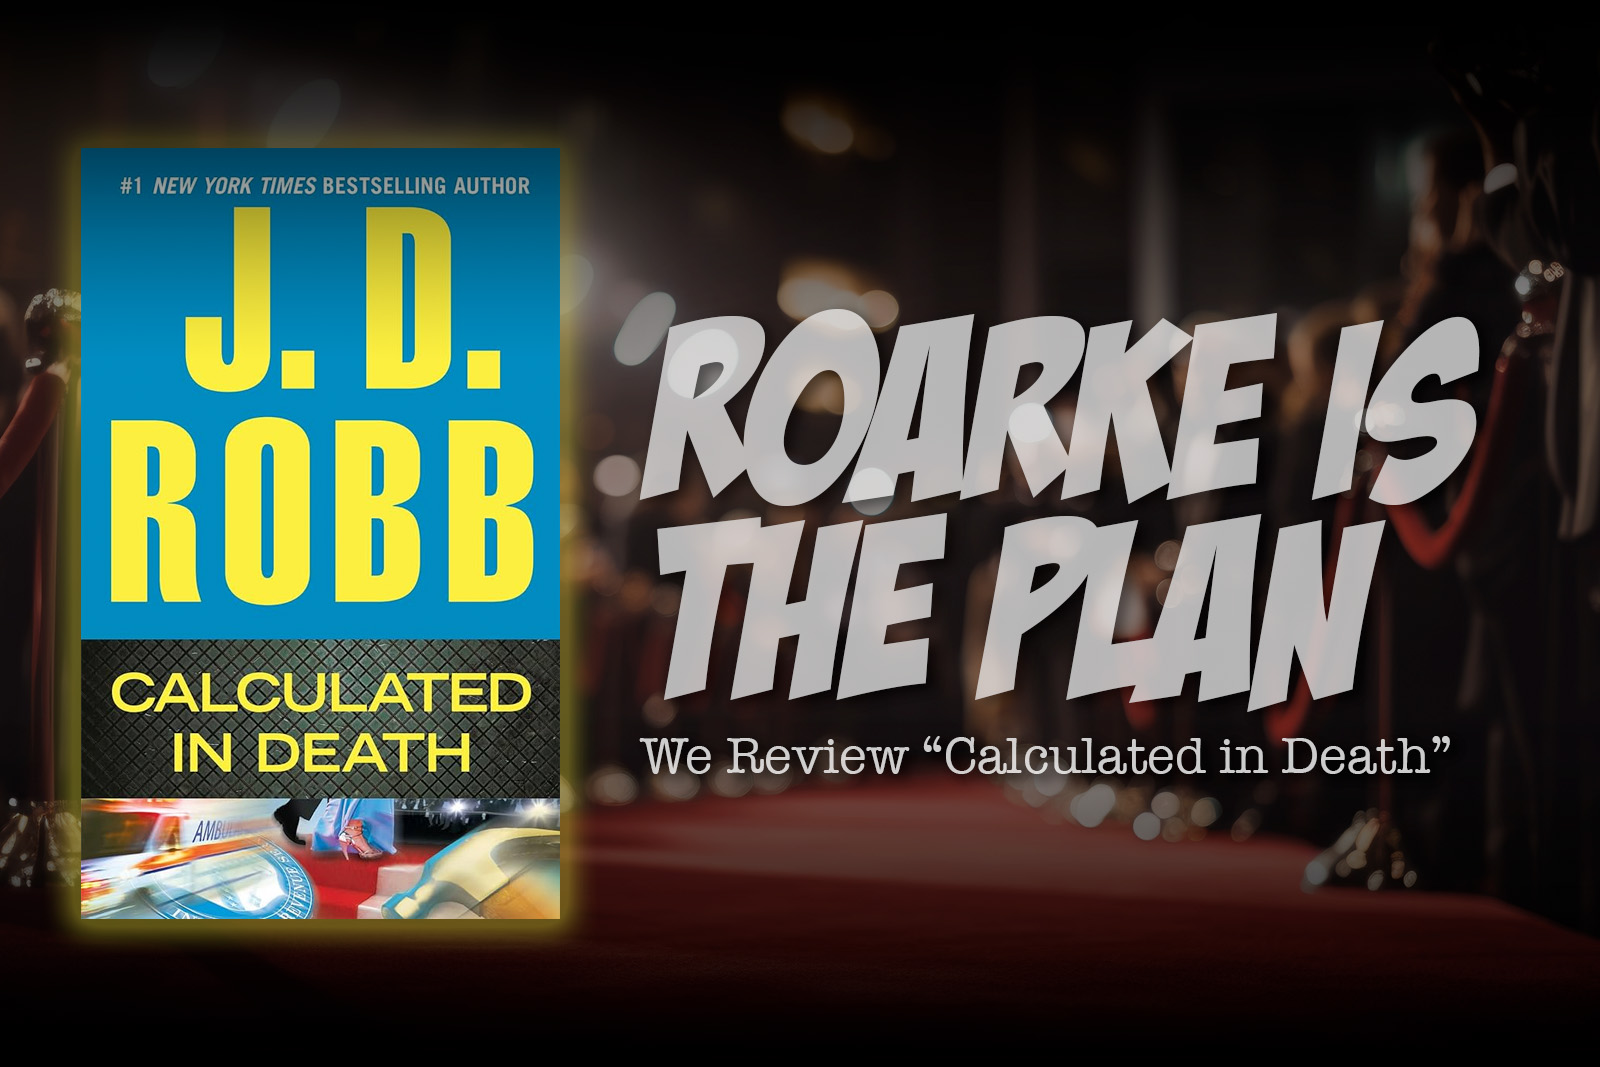 Roarke is the Plan: We Review “Calculated in Death”